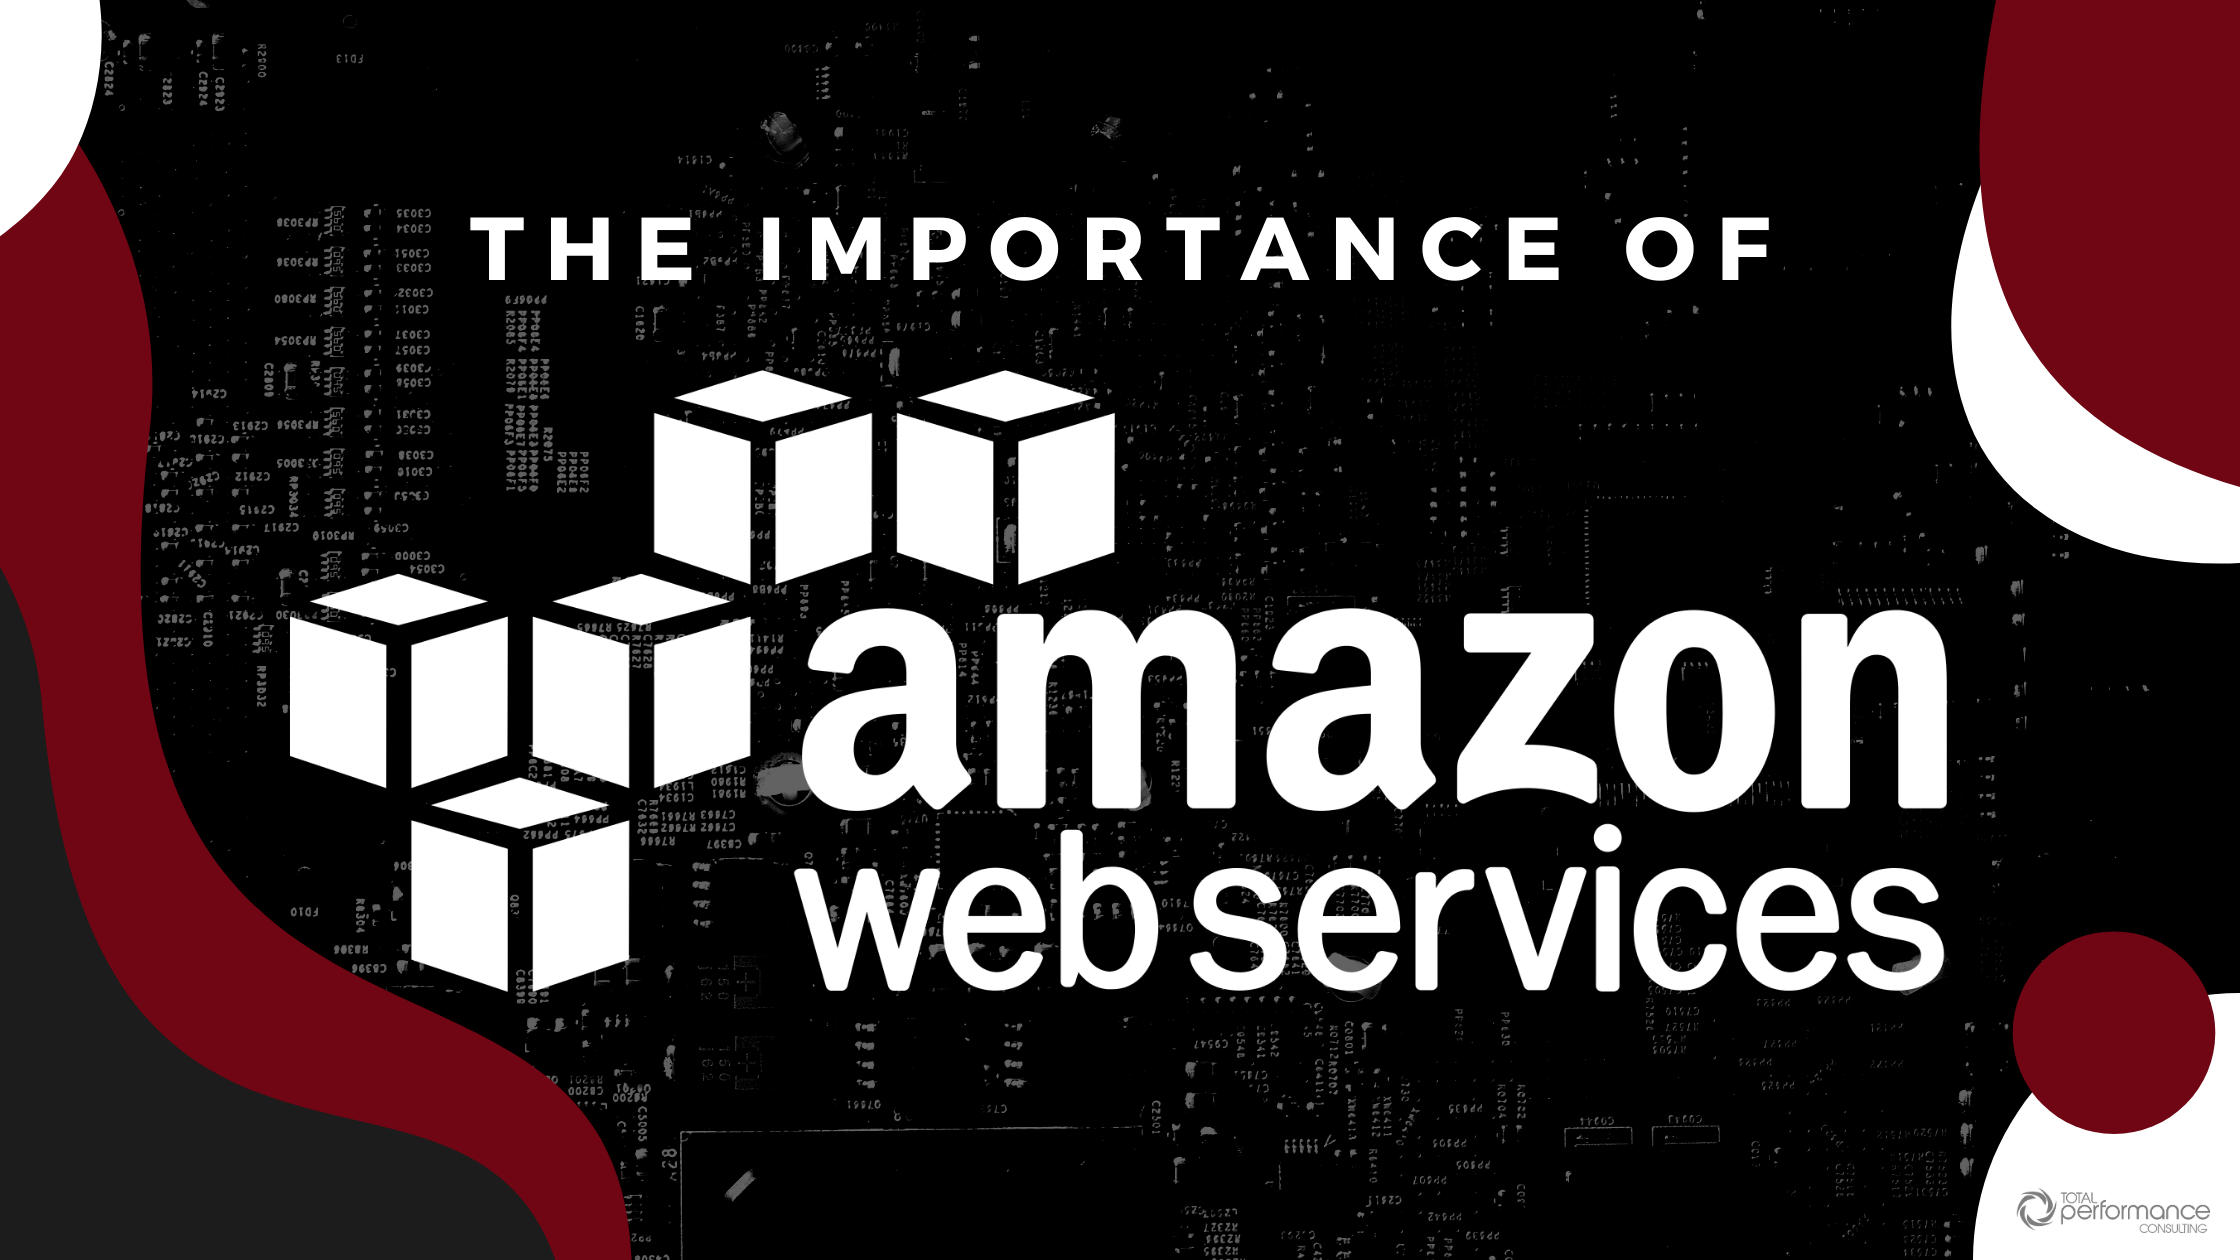 Amazon Web Services: What Are They & Why Are They Important?